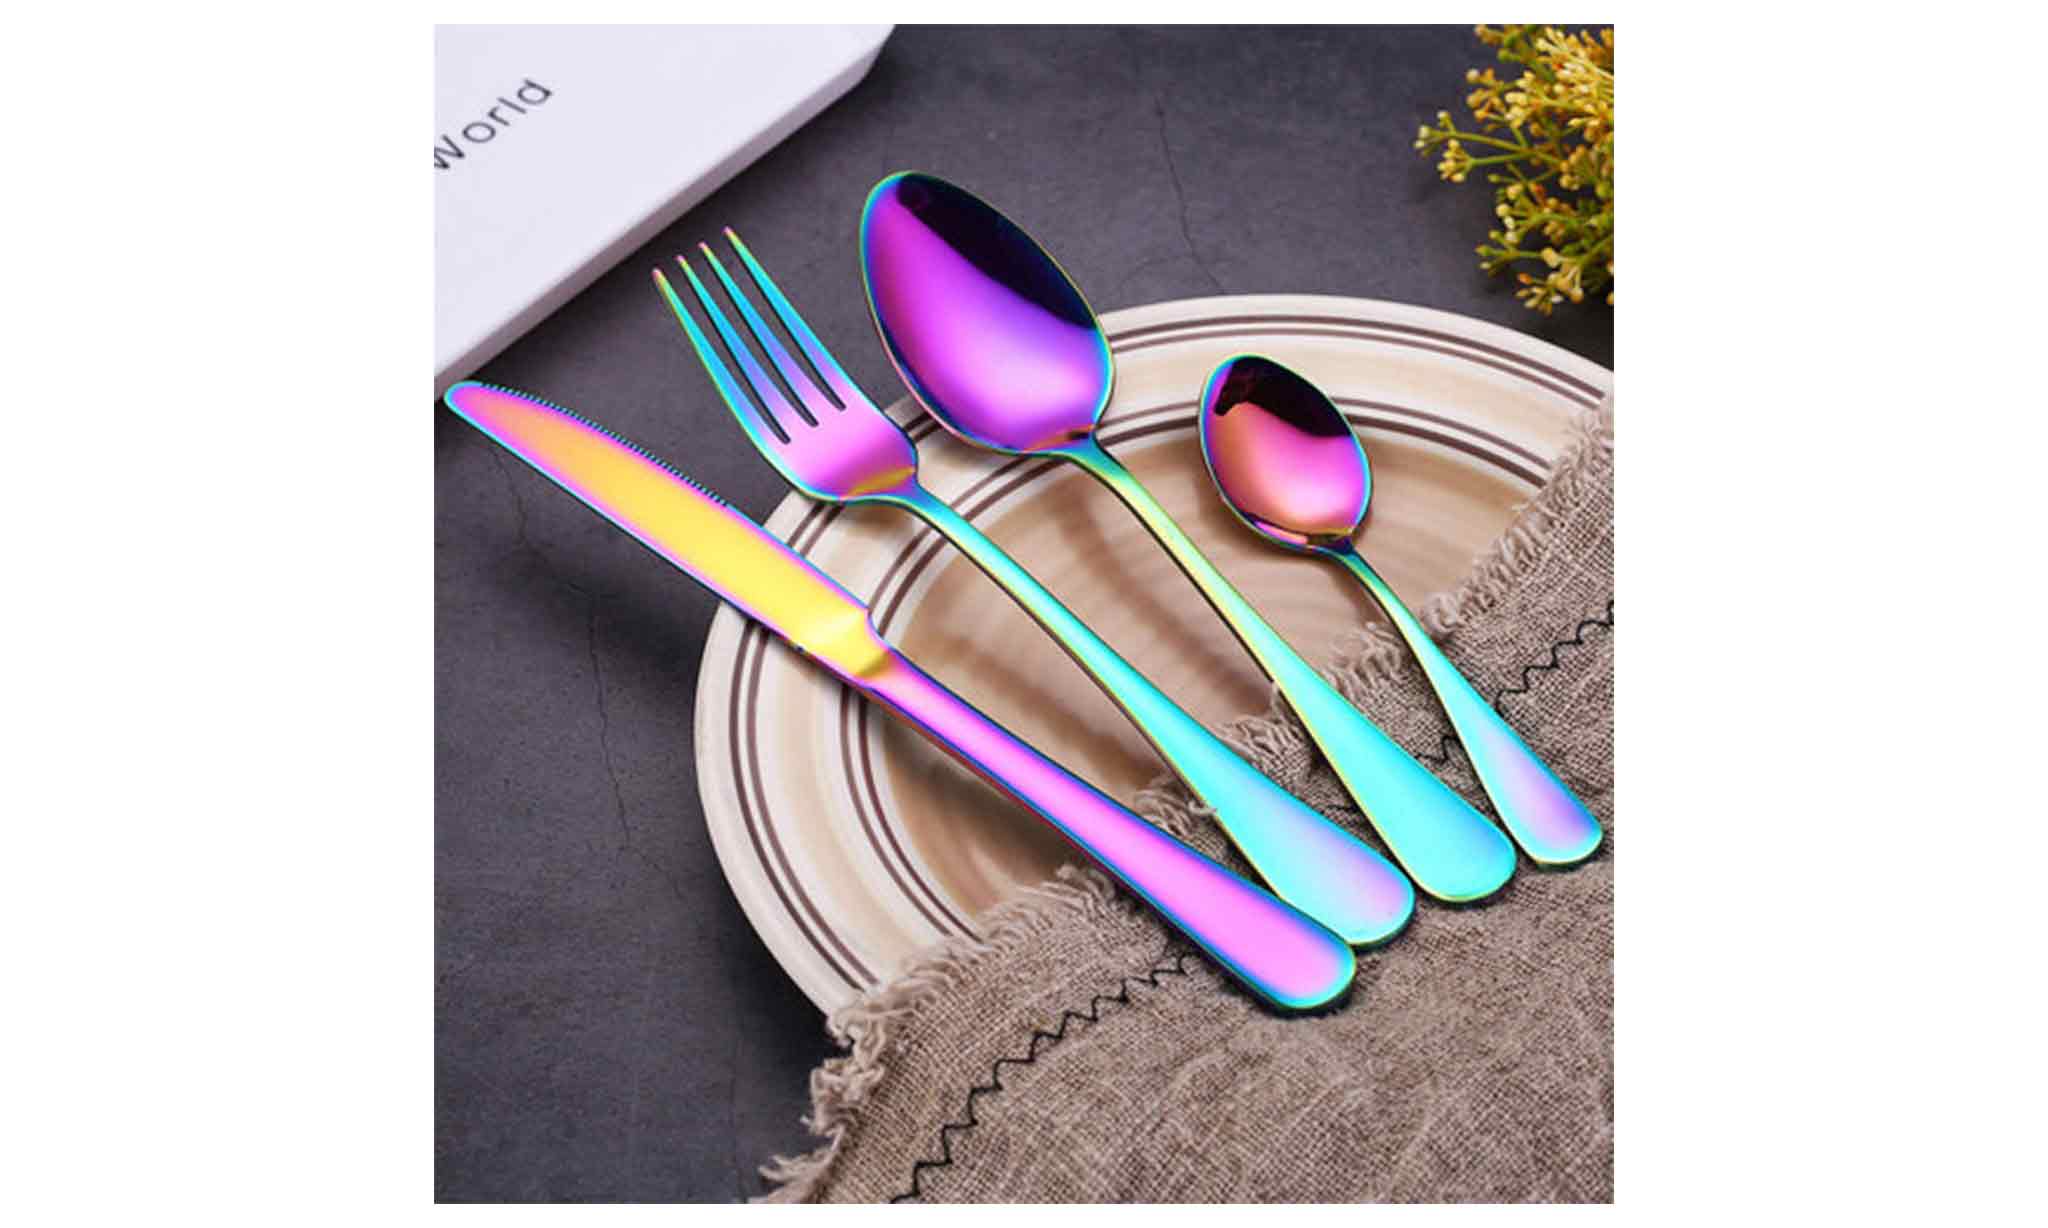 Colourful 16 pcs stainless steel cutlery set.jpg